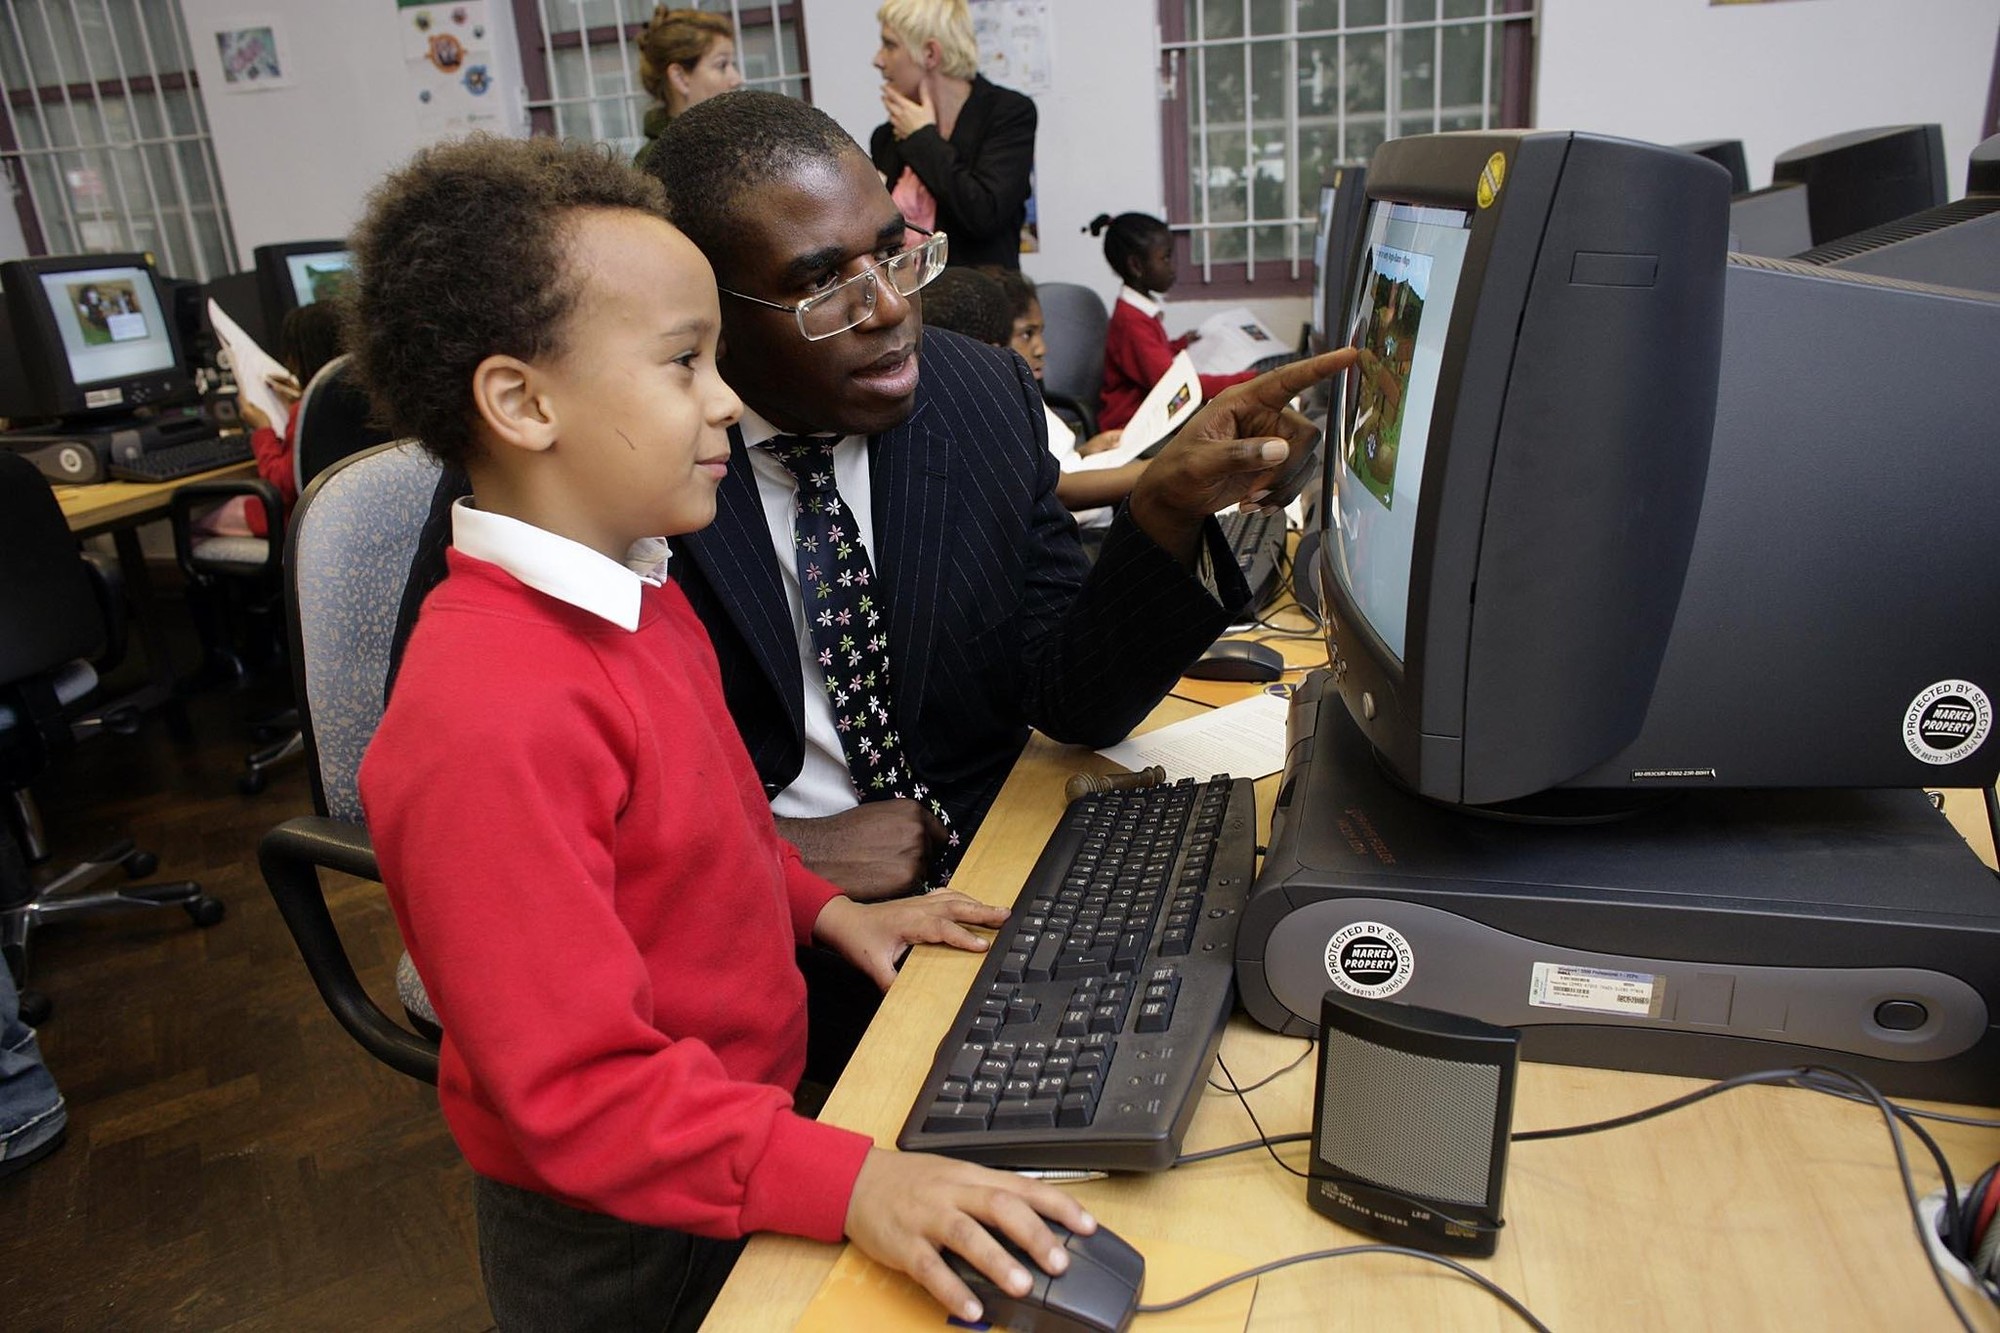 Culture Minister David Lammy tries out the new web site with some help form Apollinaire (7) from St George The Martyre School. The launch of the web site was at Coram's Fields, Guilford Street, WC1N. Photo: Edmond Terakopian / PA